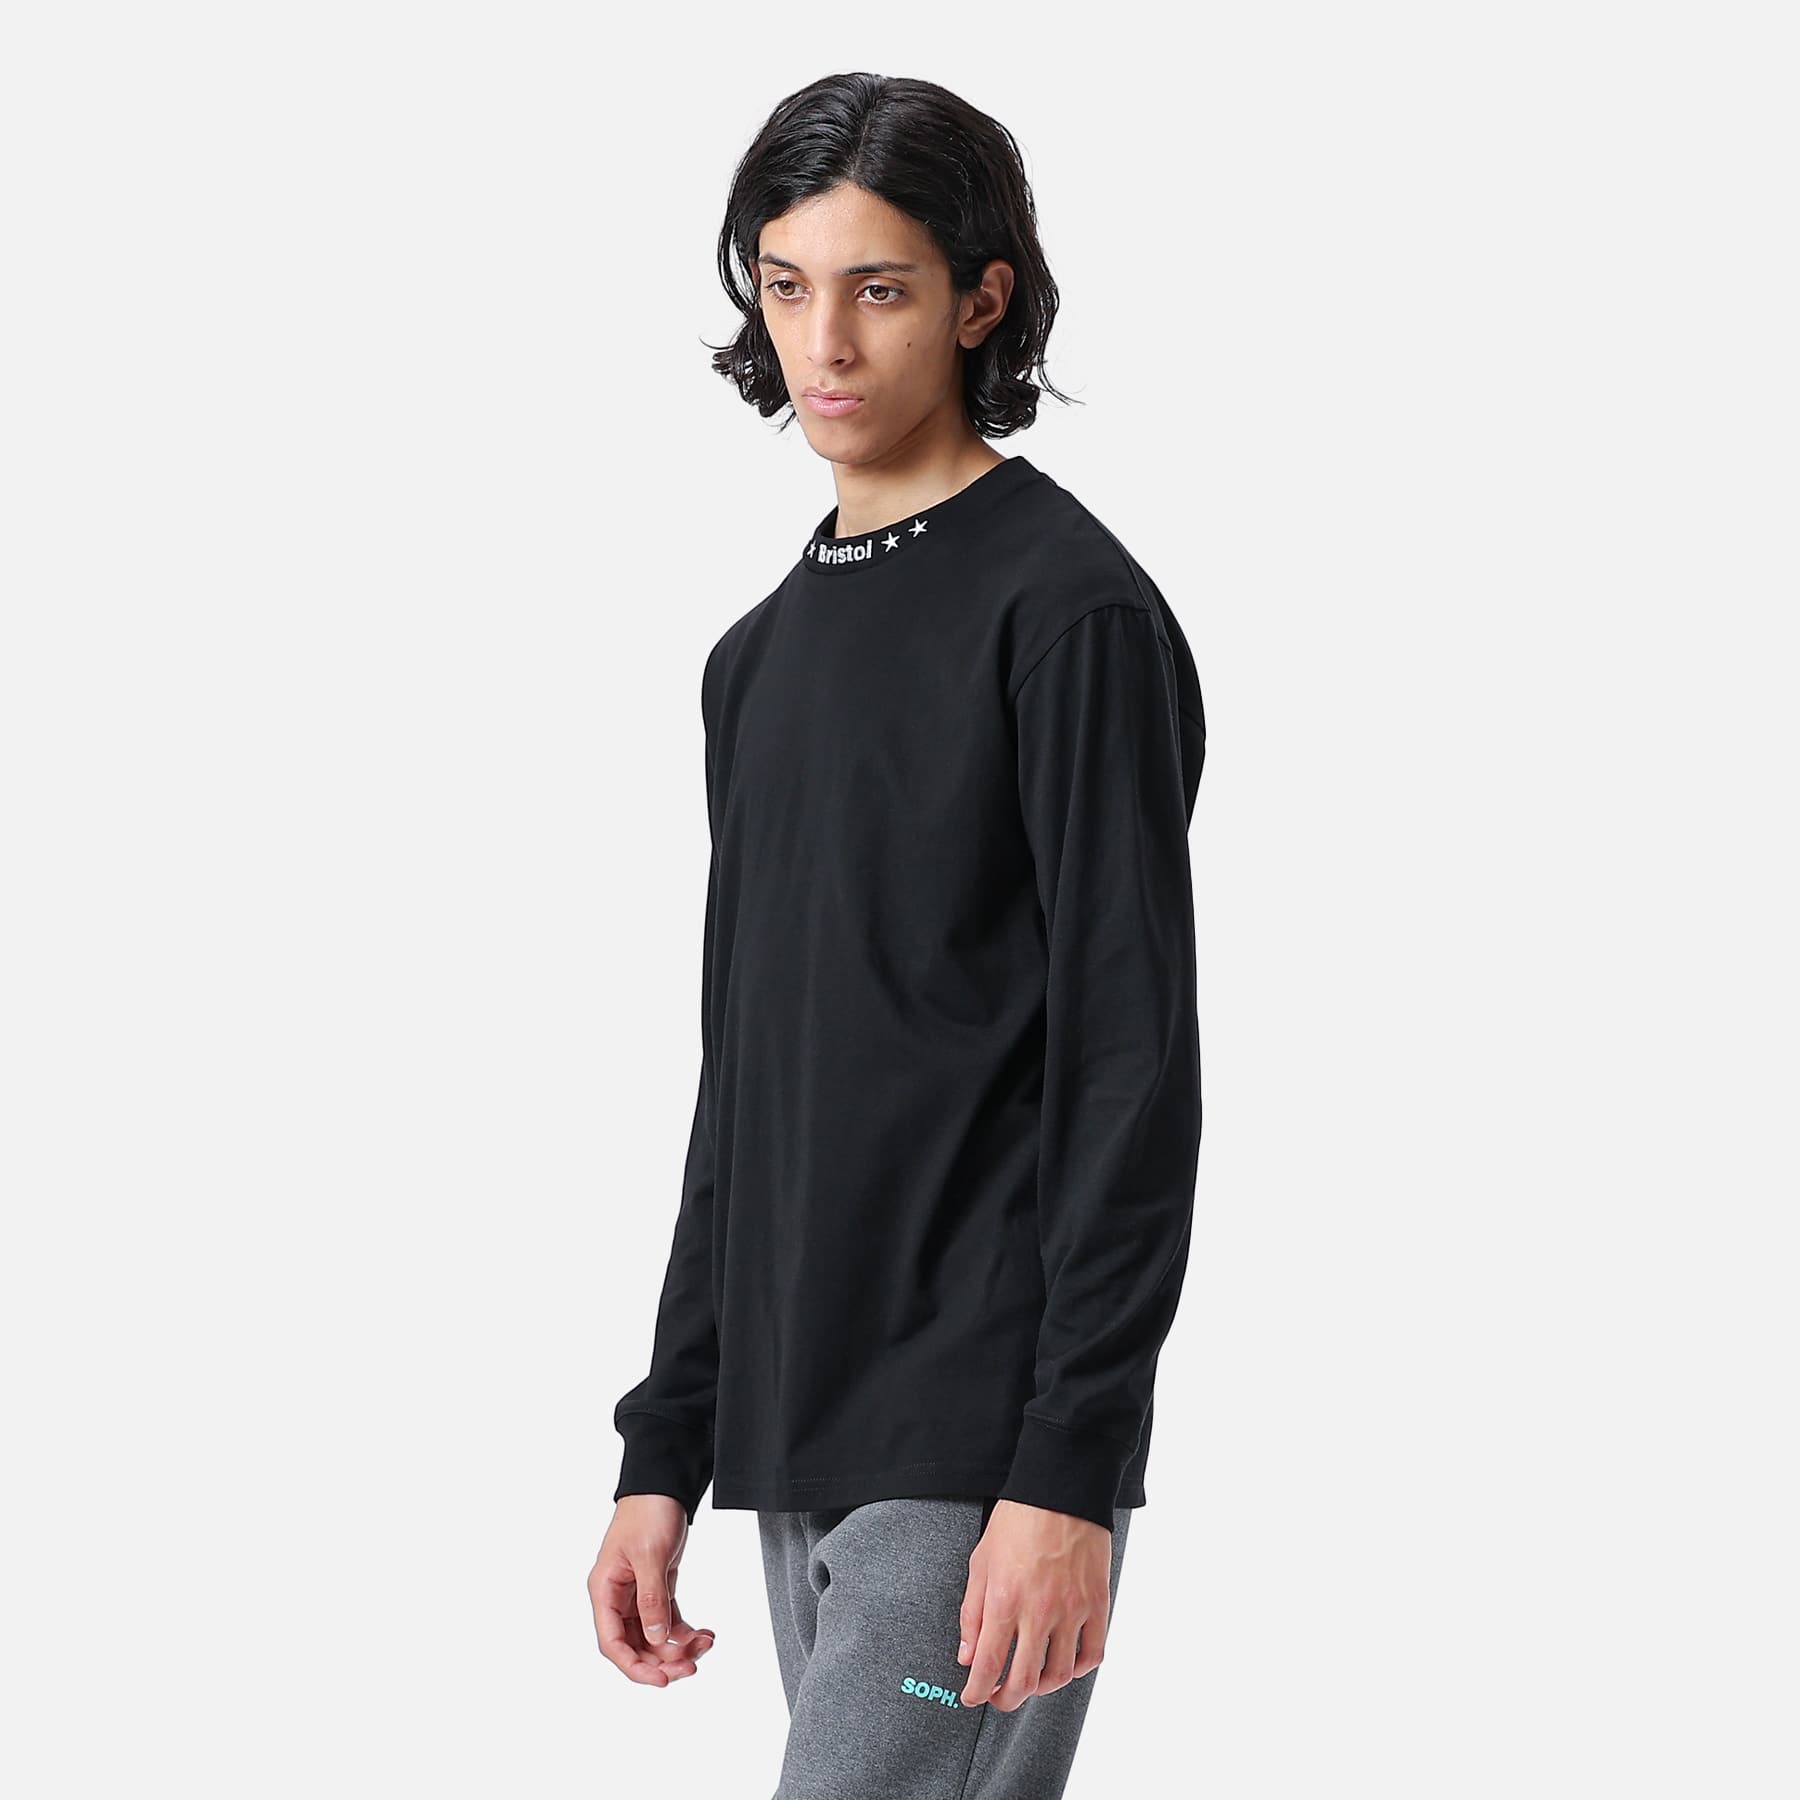 FCRB L/S RIBBED EMBROIDERED TEE - perucho.gob.ec